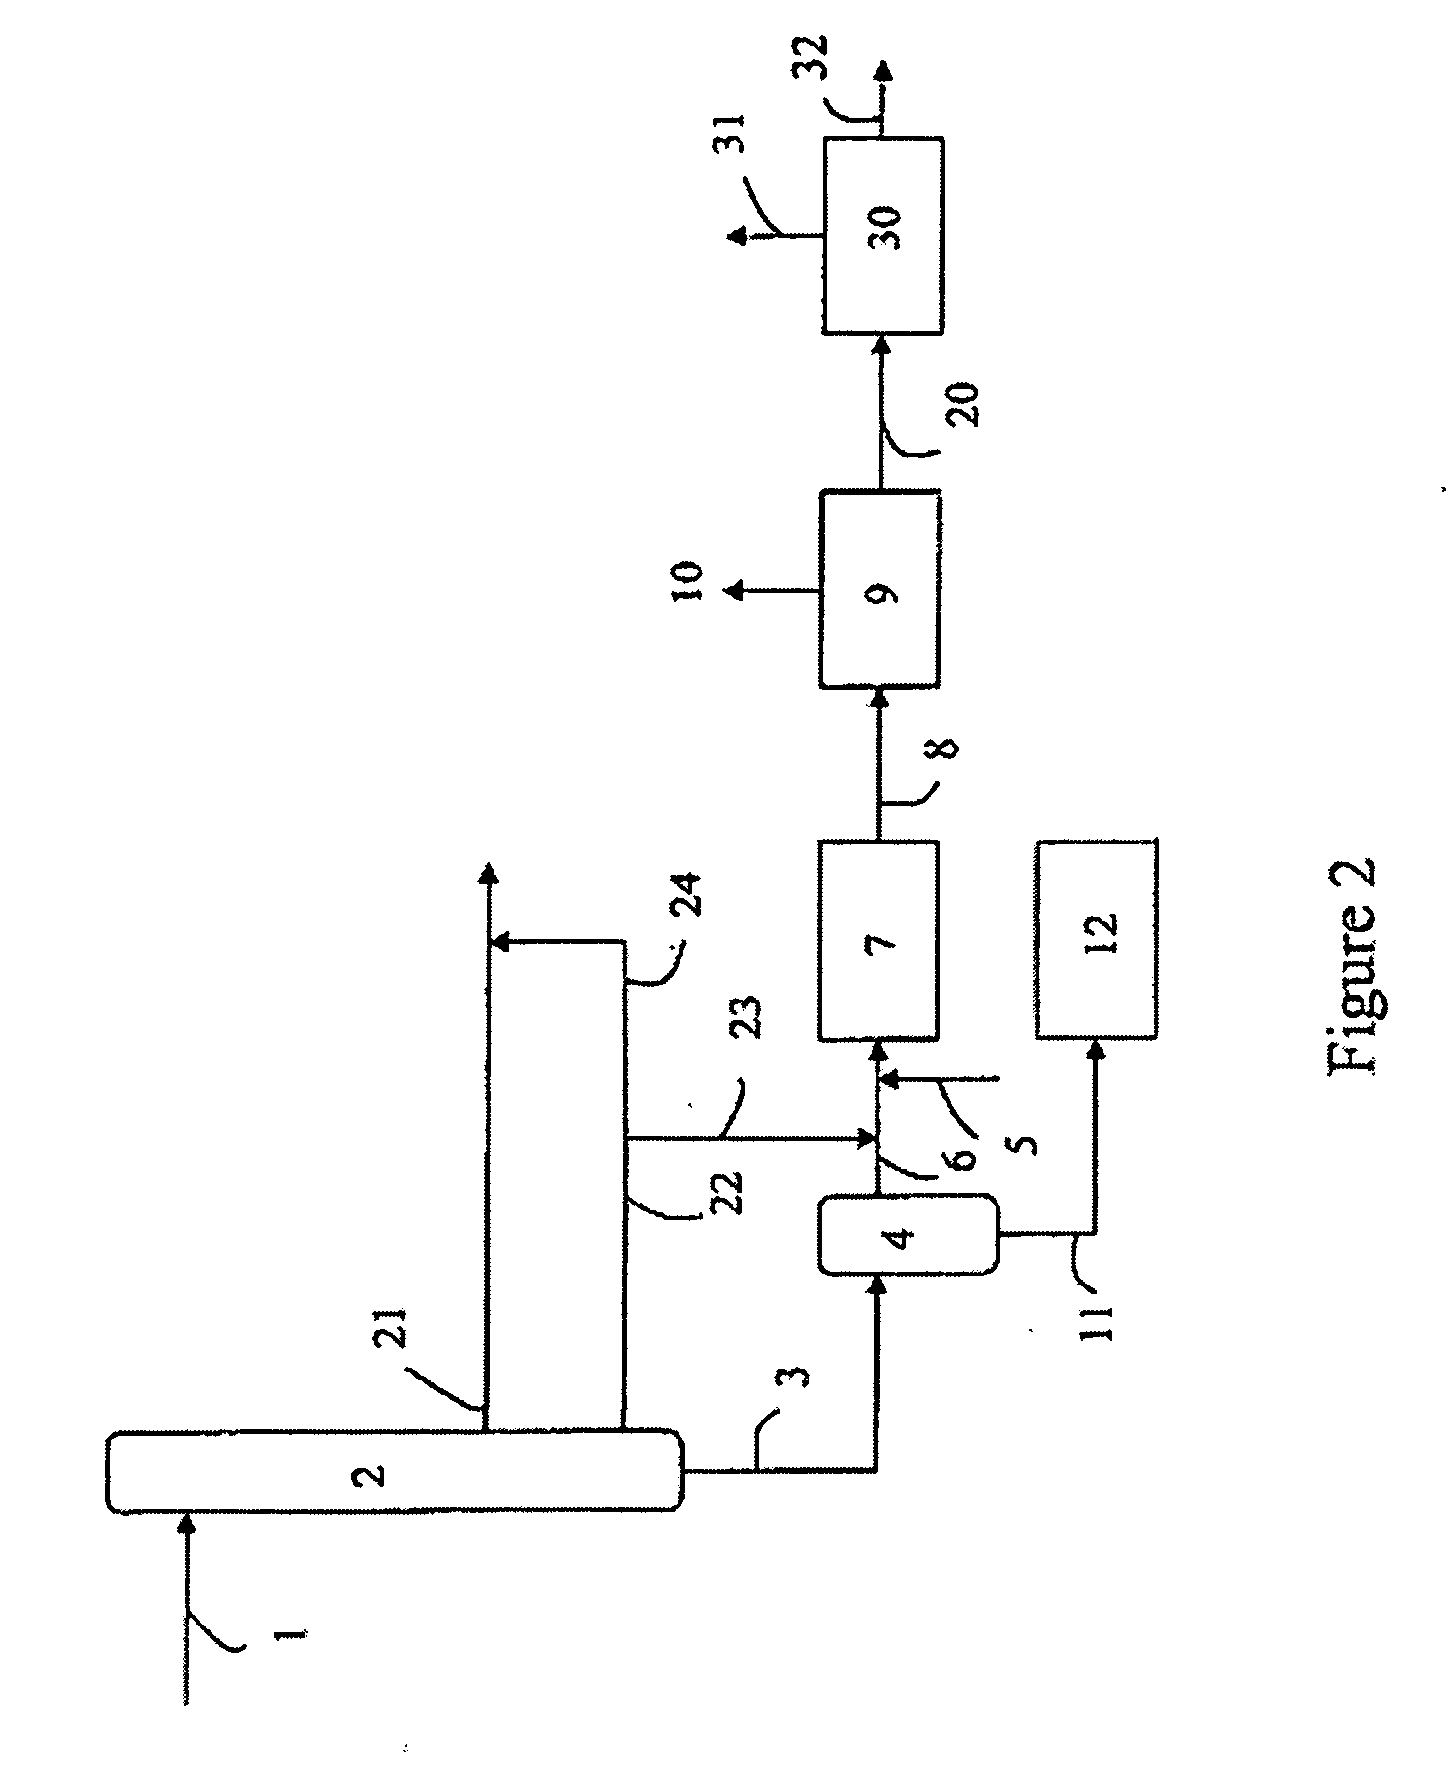 Process of mild hydrocracking including a dilution of the feedstock